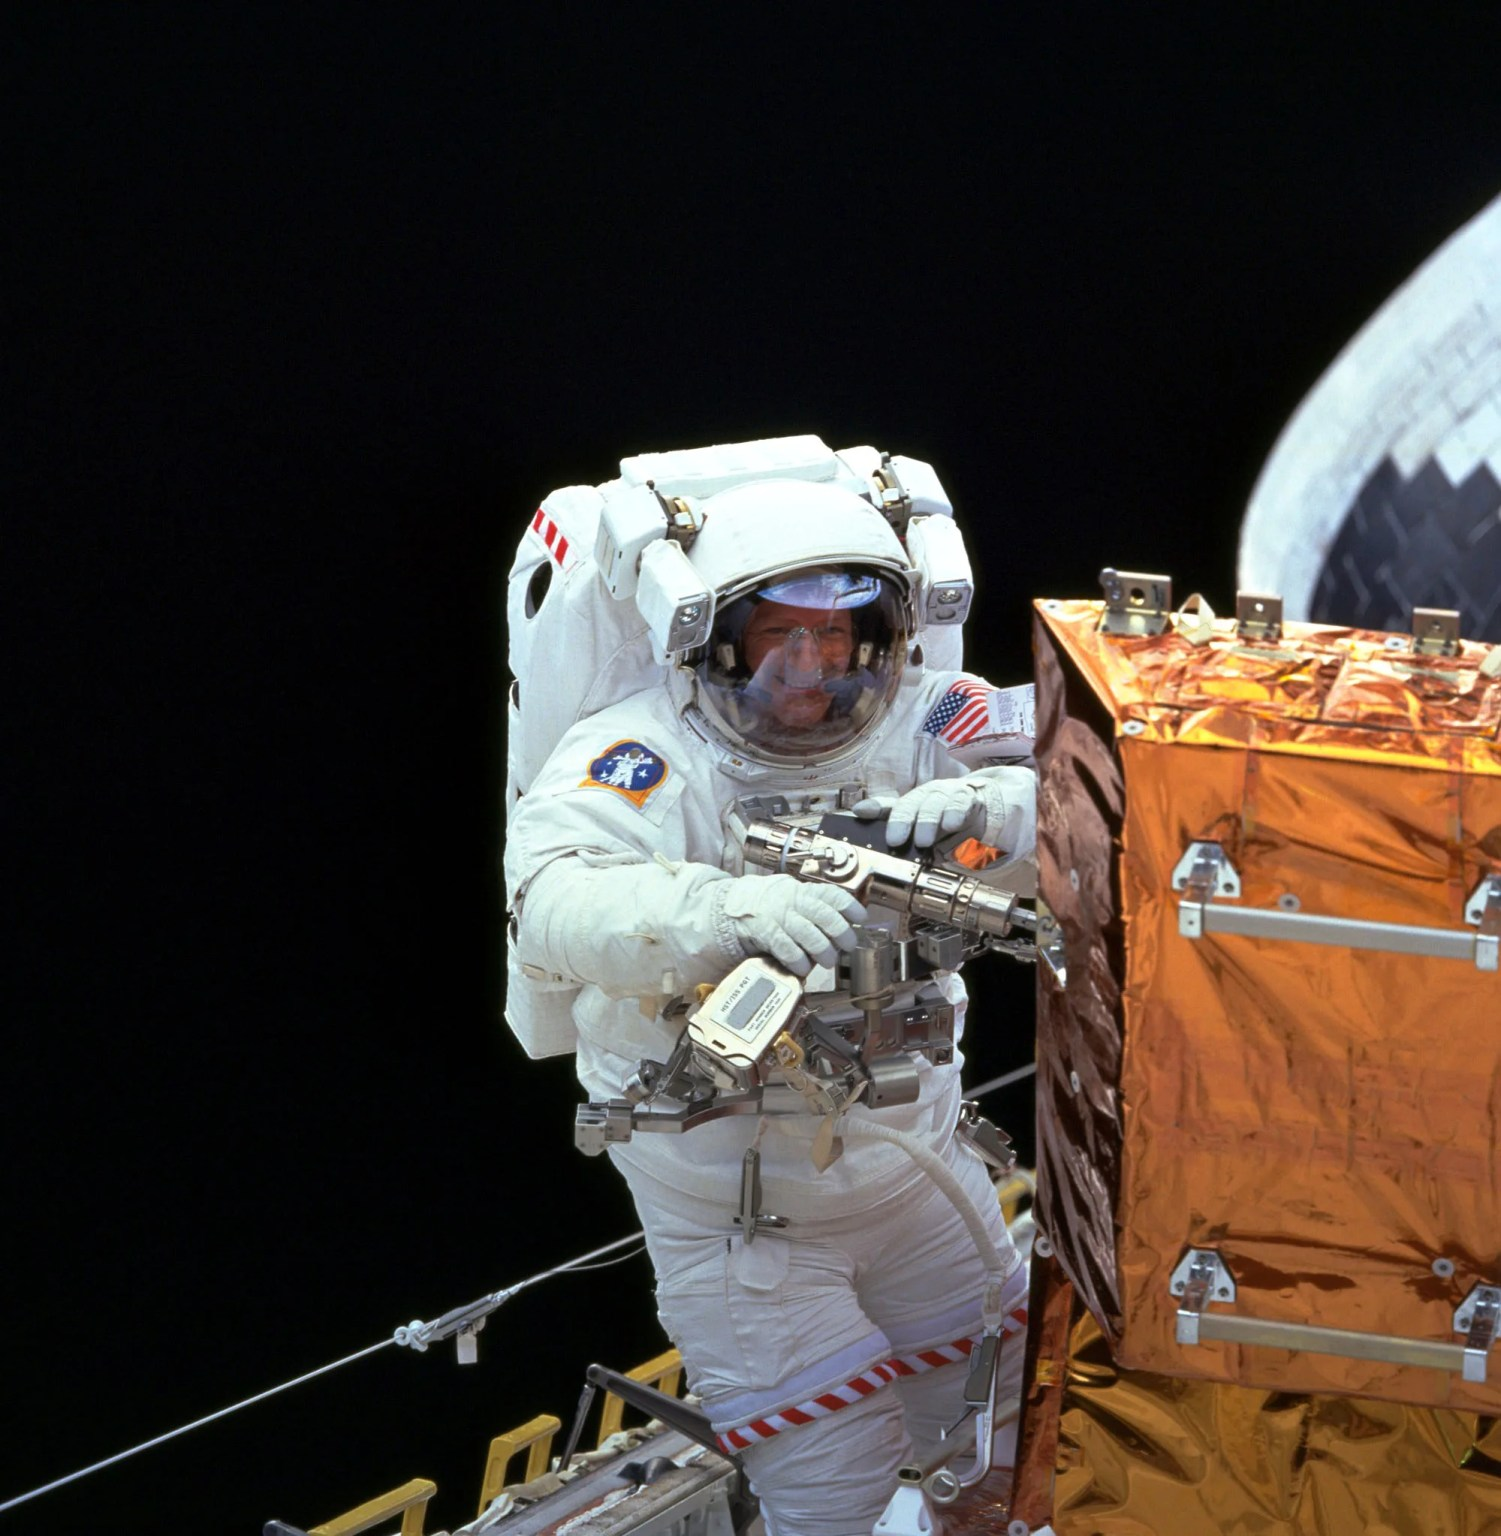 Image showing astronaut holding the Pistol Grip Tool, which looks like an electric screwdriver. The astronaut's face is visible through his visor, he is smiling. He stands next to a large gold box with a bit of the Shuttle visible behind him.